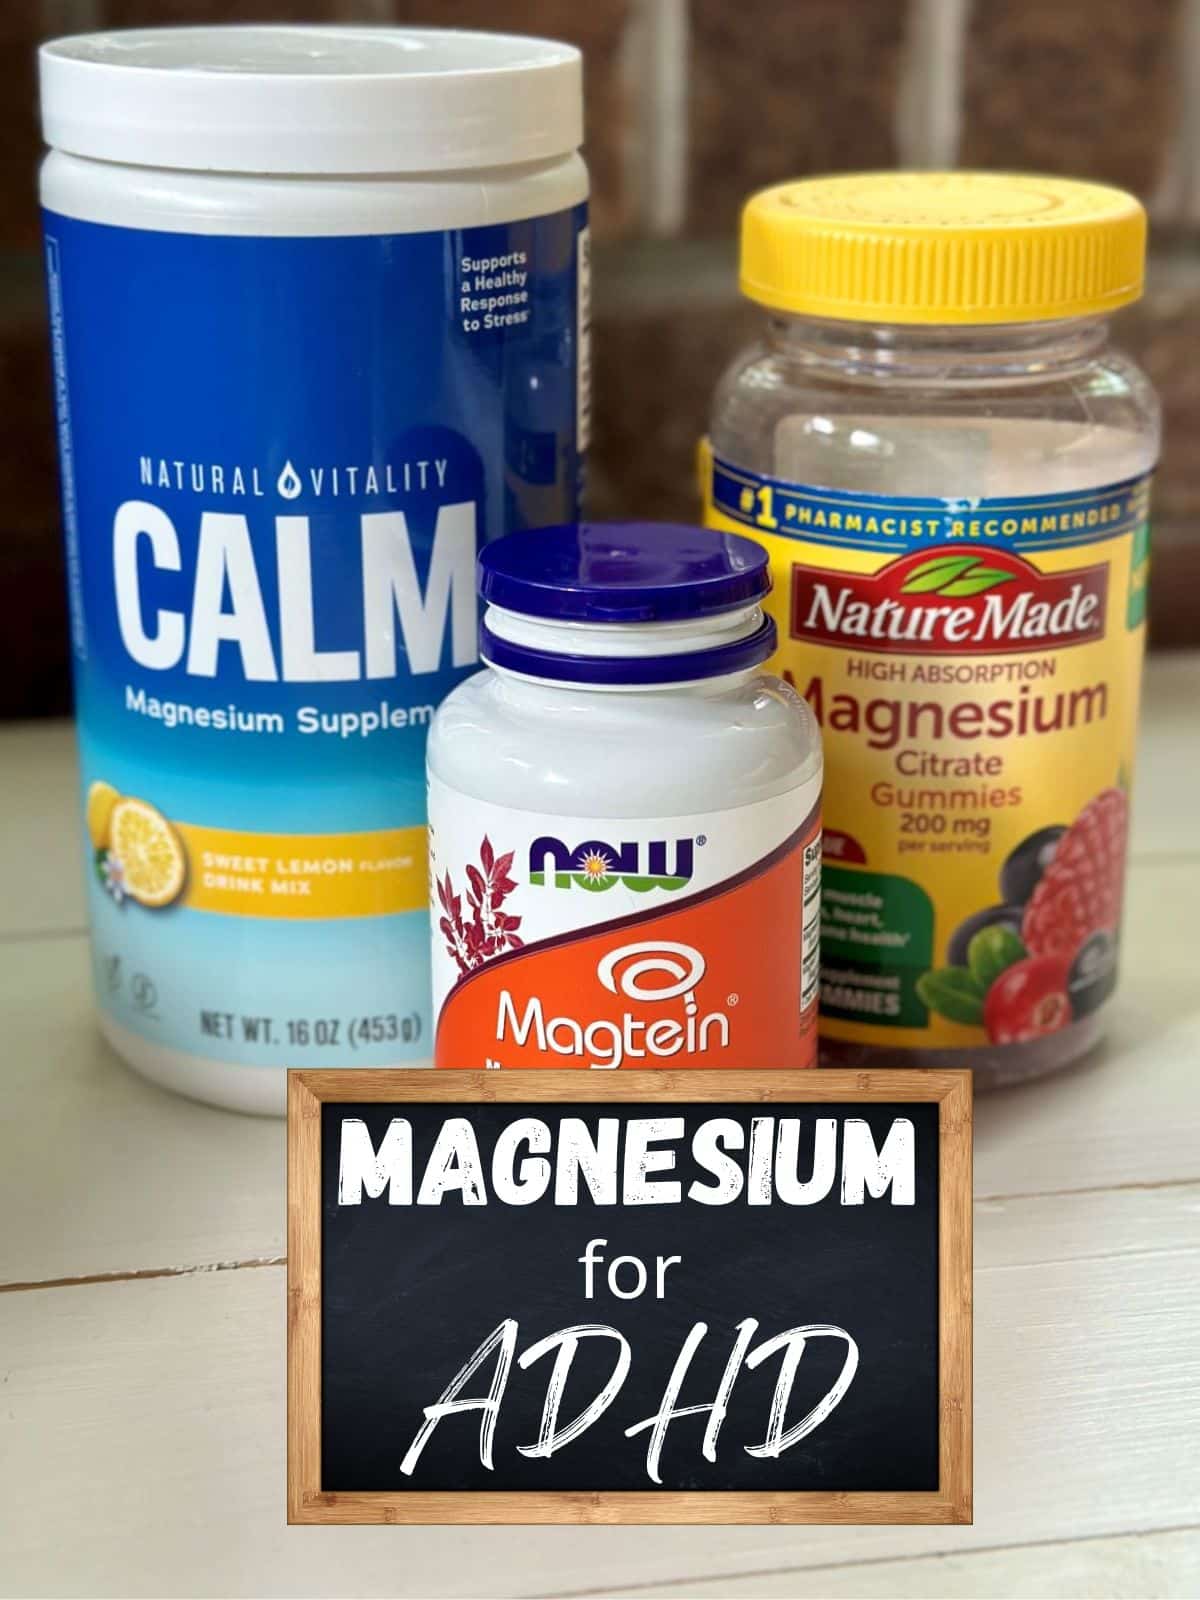 A bottle of NOW Magnesium L-Threonate, a bottle of Magnesium Citrate Gummies, and a Container of Magnesium Calm Powder Supplement on a table with the text overlay "Magnesium for ADHD."